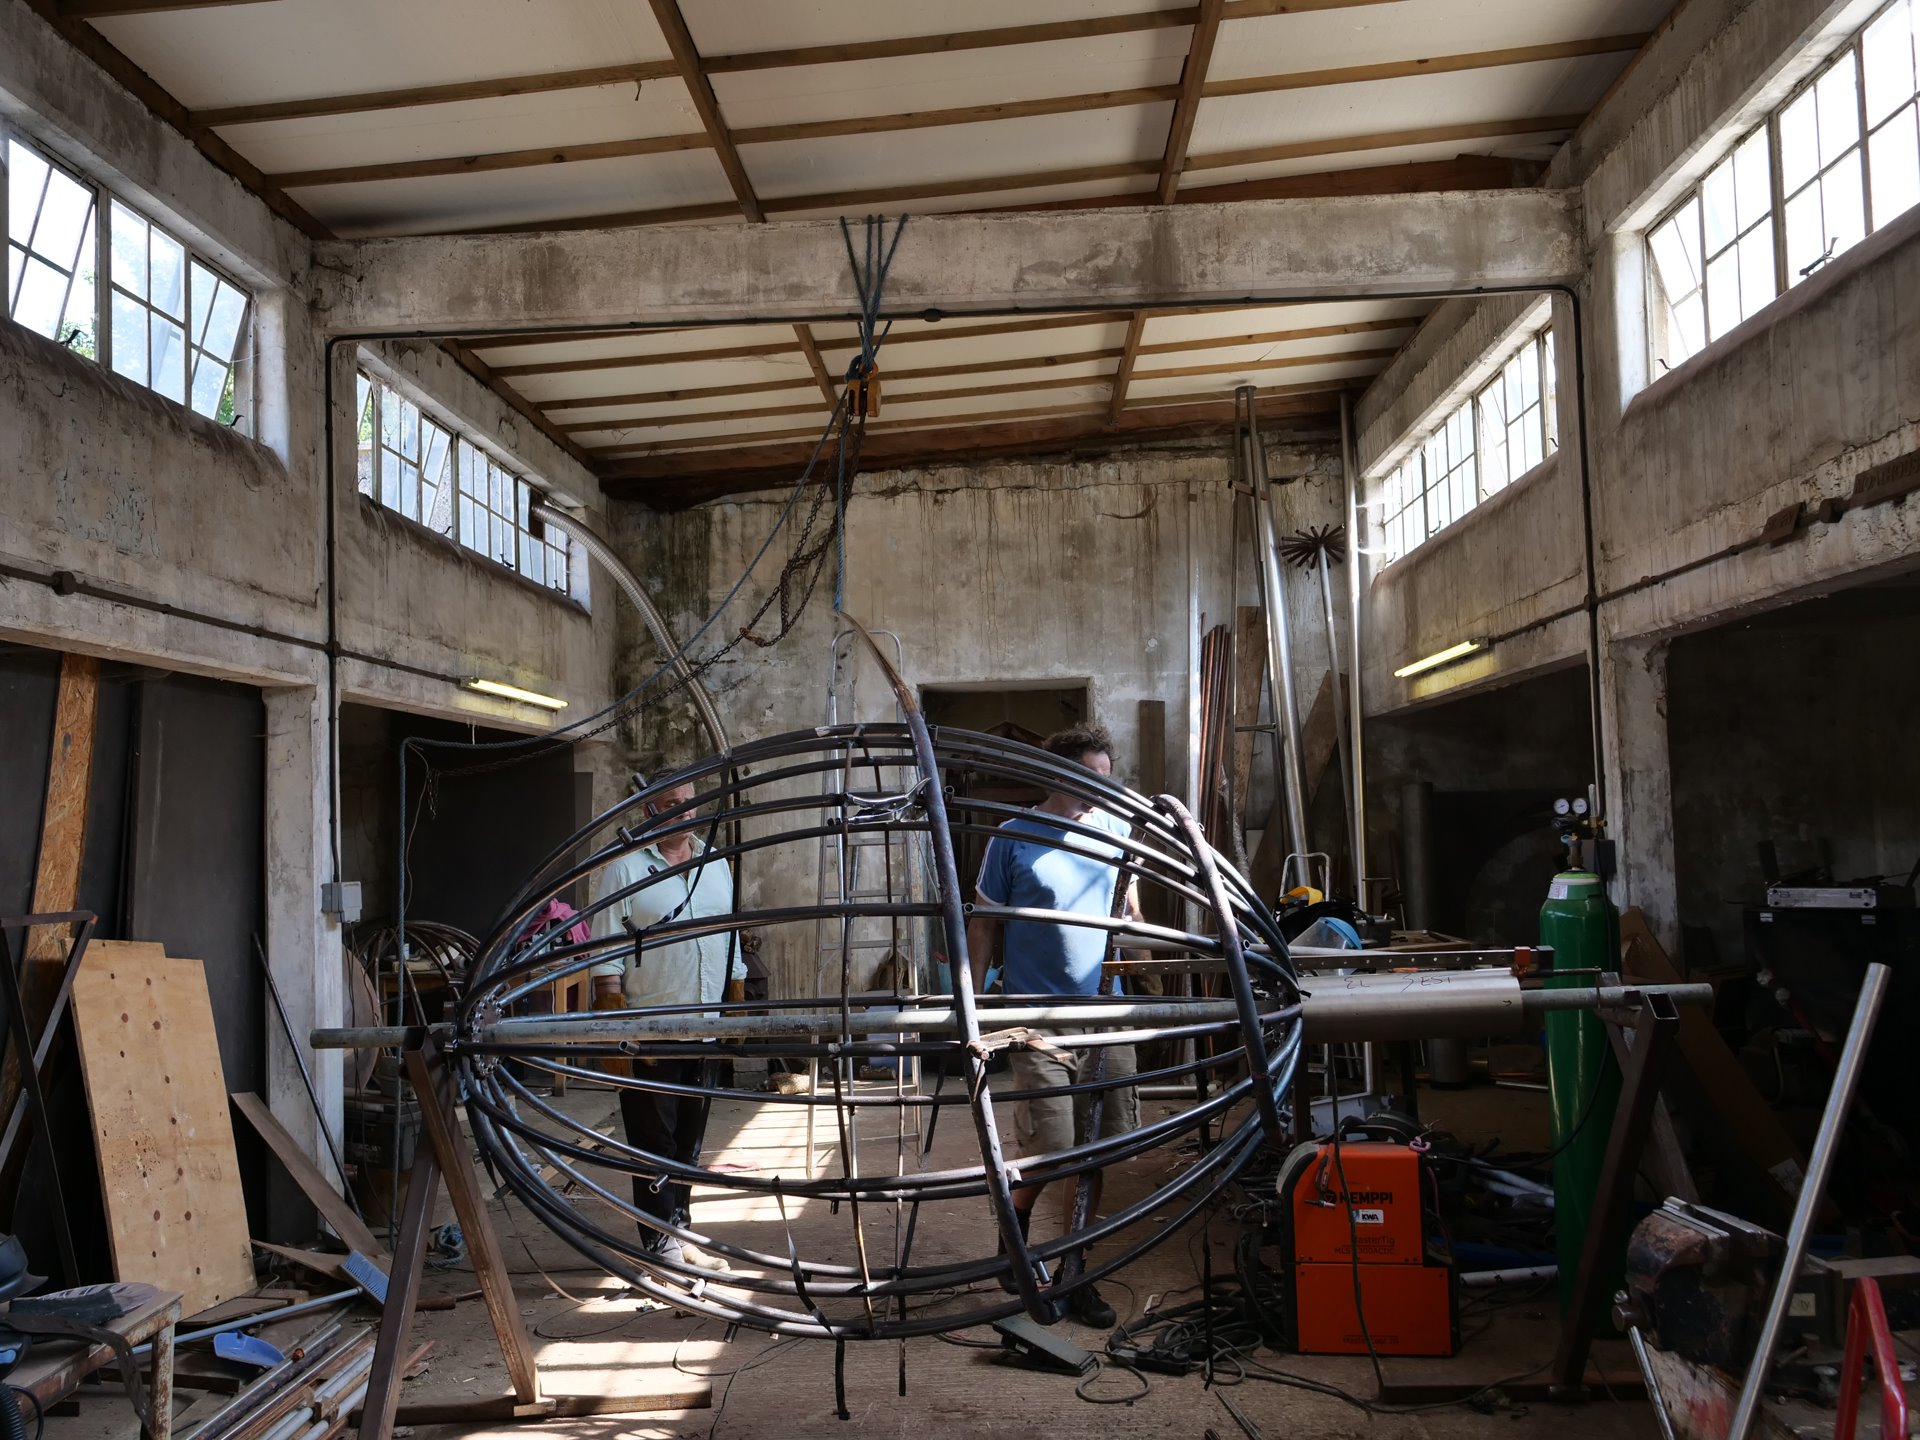 Giles Rayner and Chisholm Barnett work on bespoke sculpture for rewilding country estate Elmore in the Cotswolds